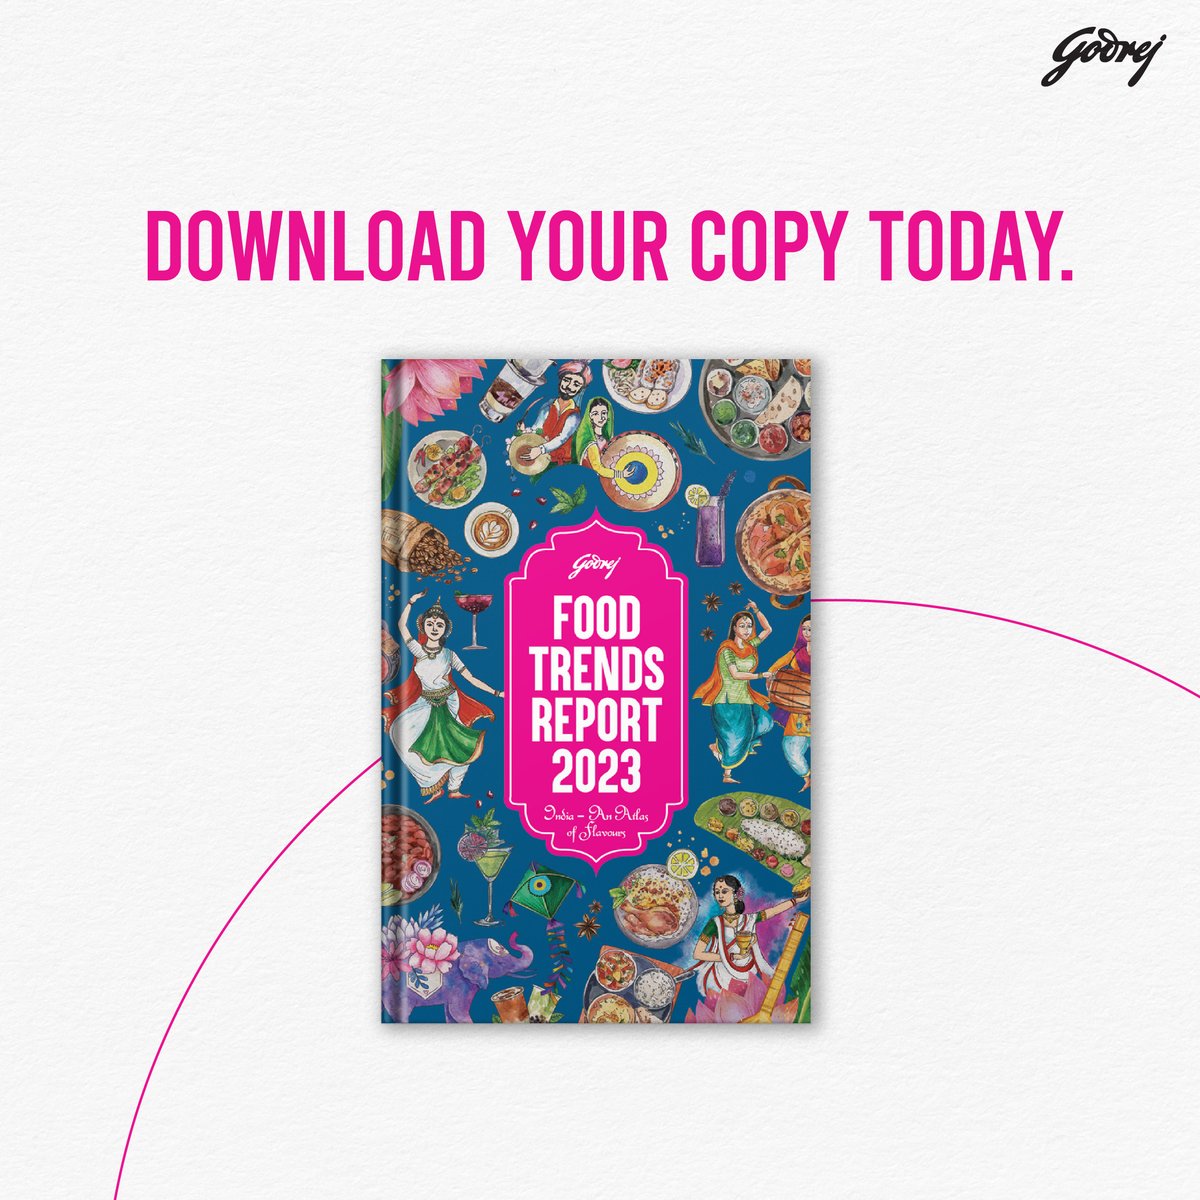 When India wanted to understand its festive food trends, we said #AsYouWishIndia with the Godrej Food Trends Report. It will tell you all about India’s new tastes in festive mithais and snacks. Go on, download it today at bit.ly/3mPkpMS